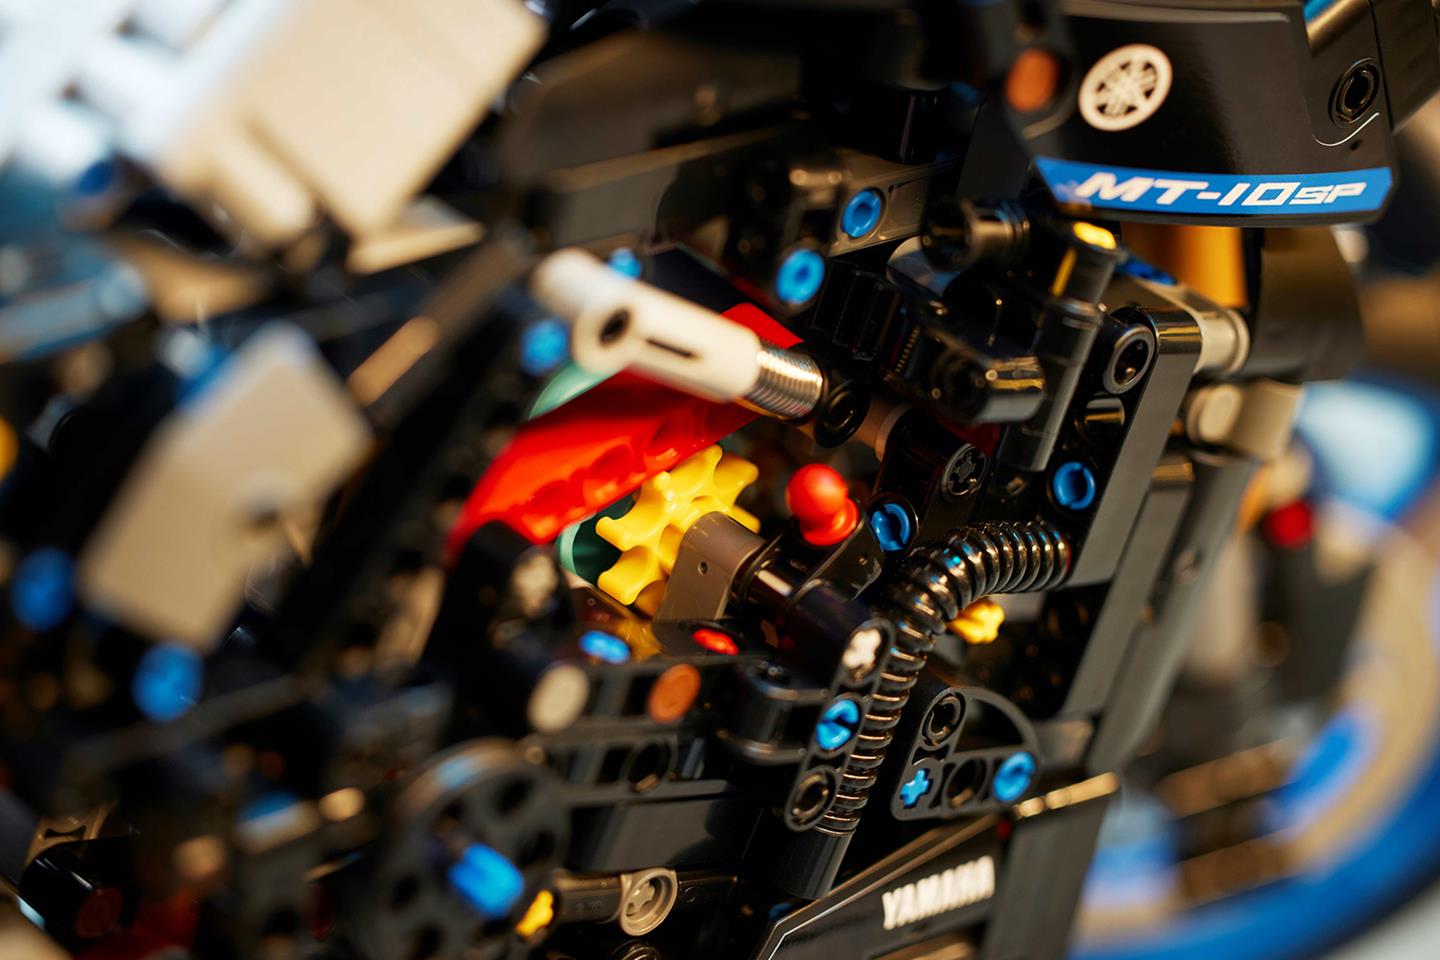 Bricking it! Yamaha team up with Lego for new MT-10SP build | MCN